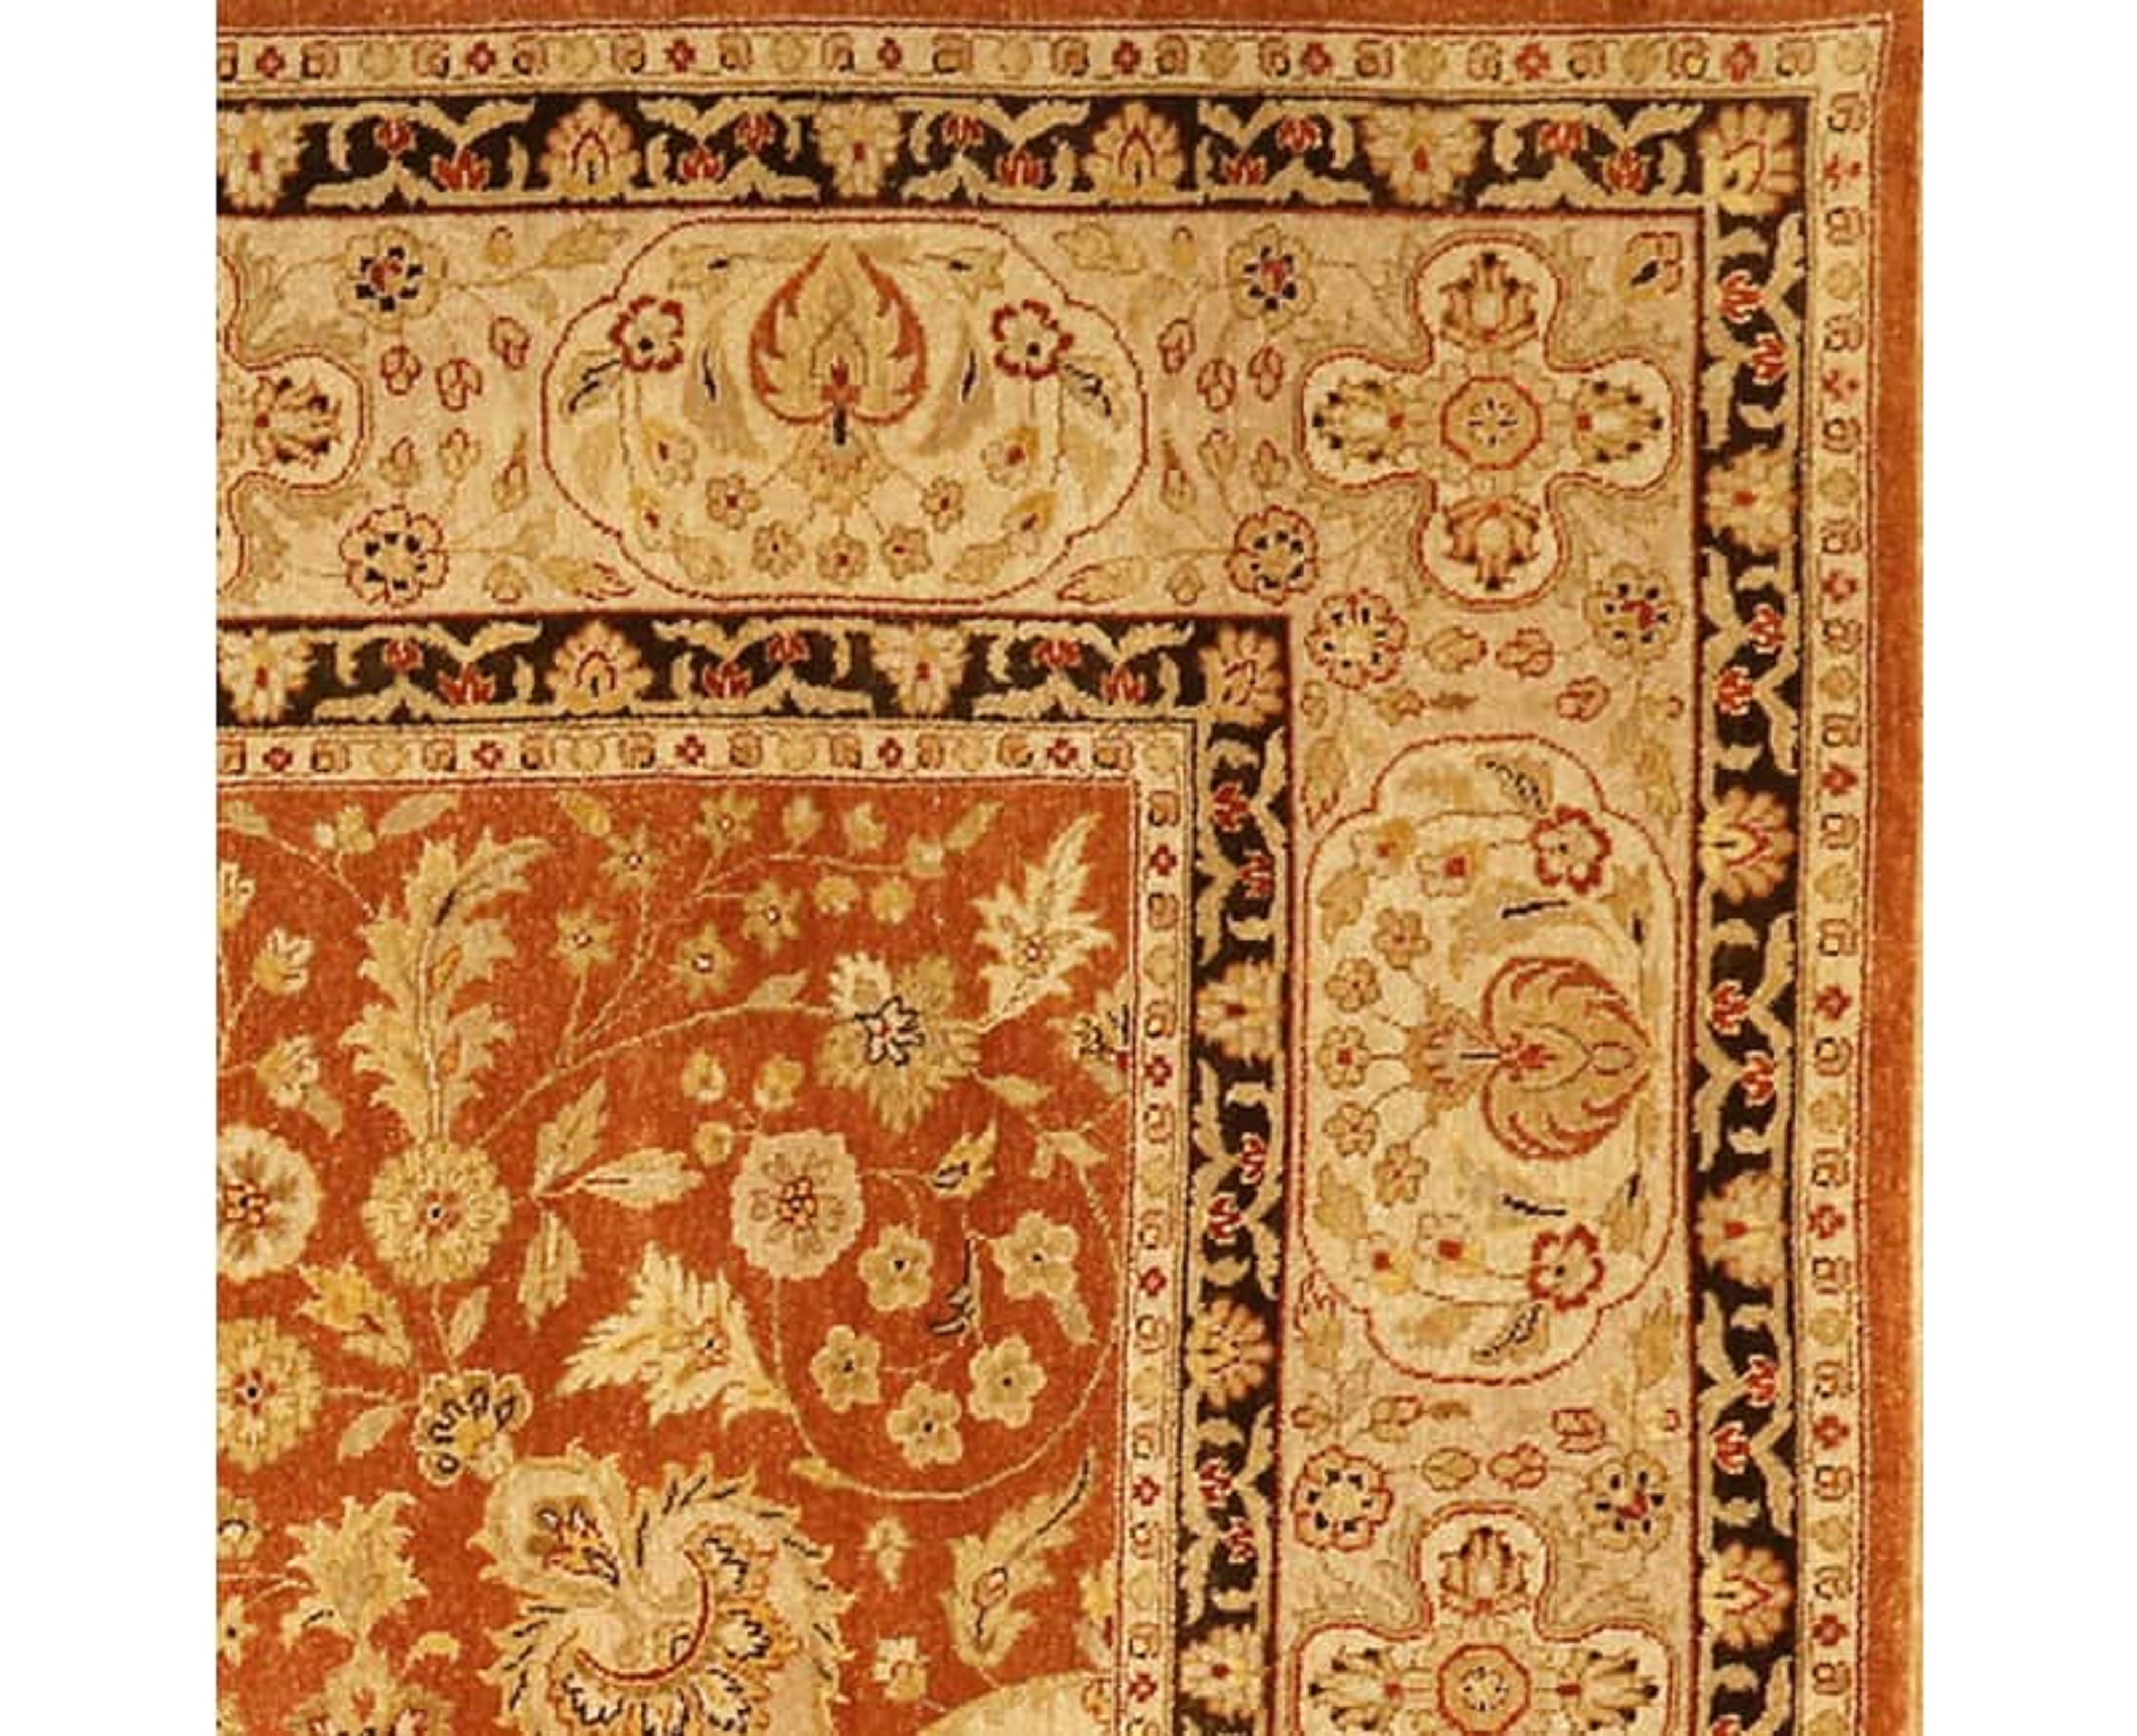 Traditional Hand-woven Indian Agra rug Recreation – Traditional handwoven Indian Agra rug featuring an elegant mirrored all-over floral design rendered in a plush field. The brown field is surrounded by a light gray colored border featuring a